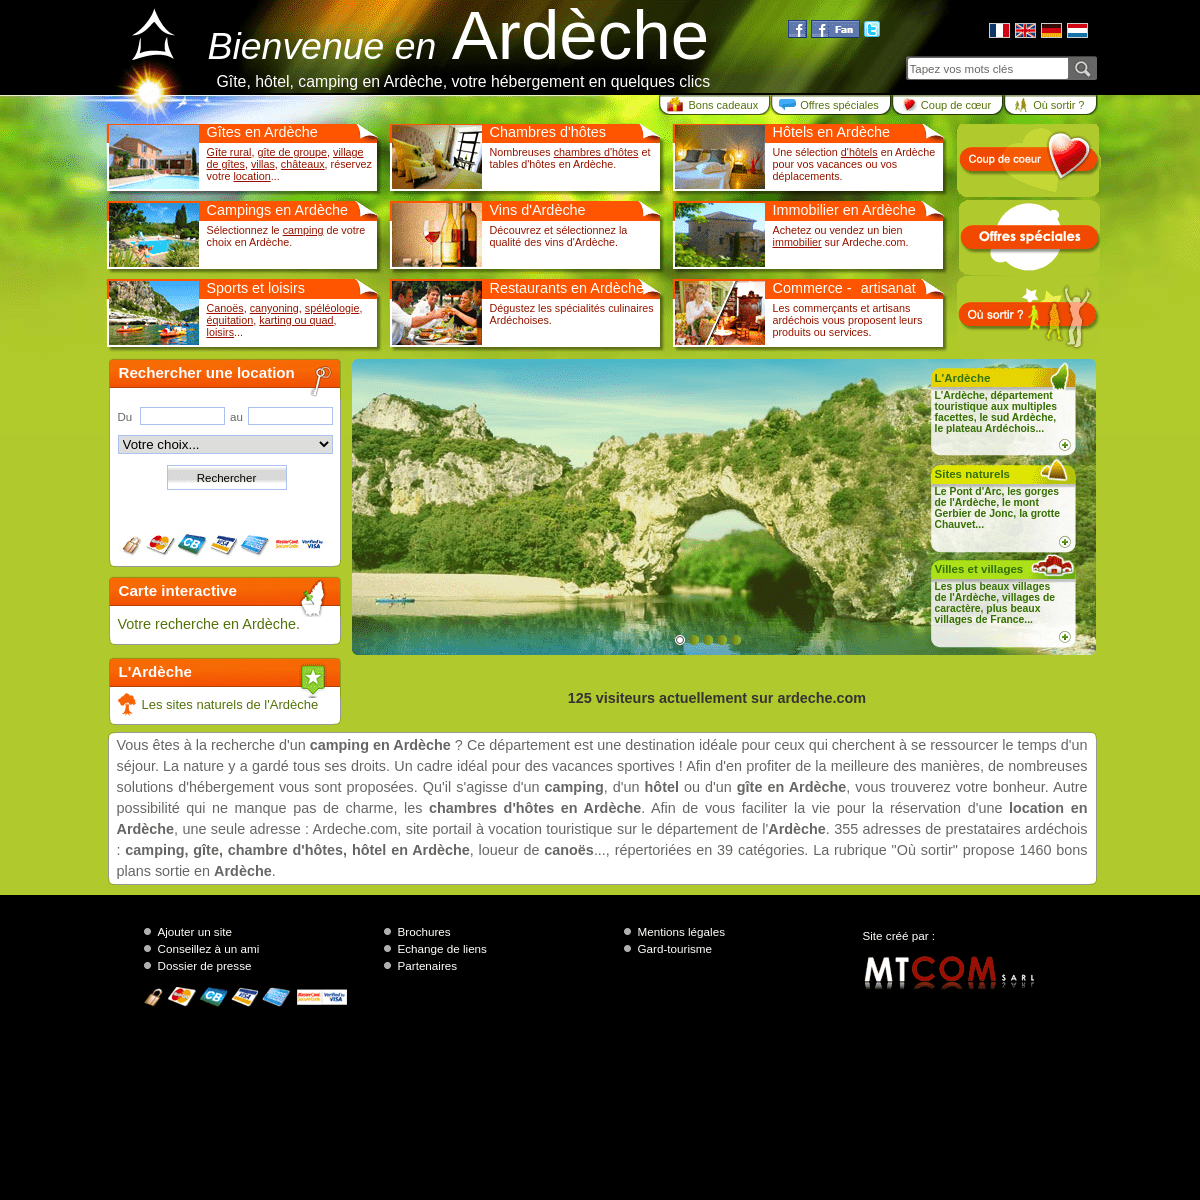 A complete backup of https://ardeche.com